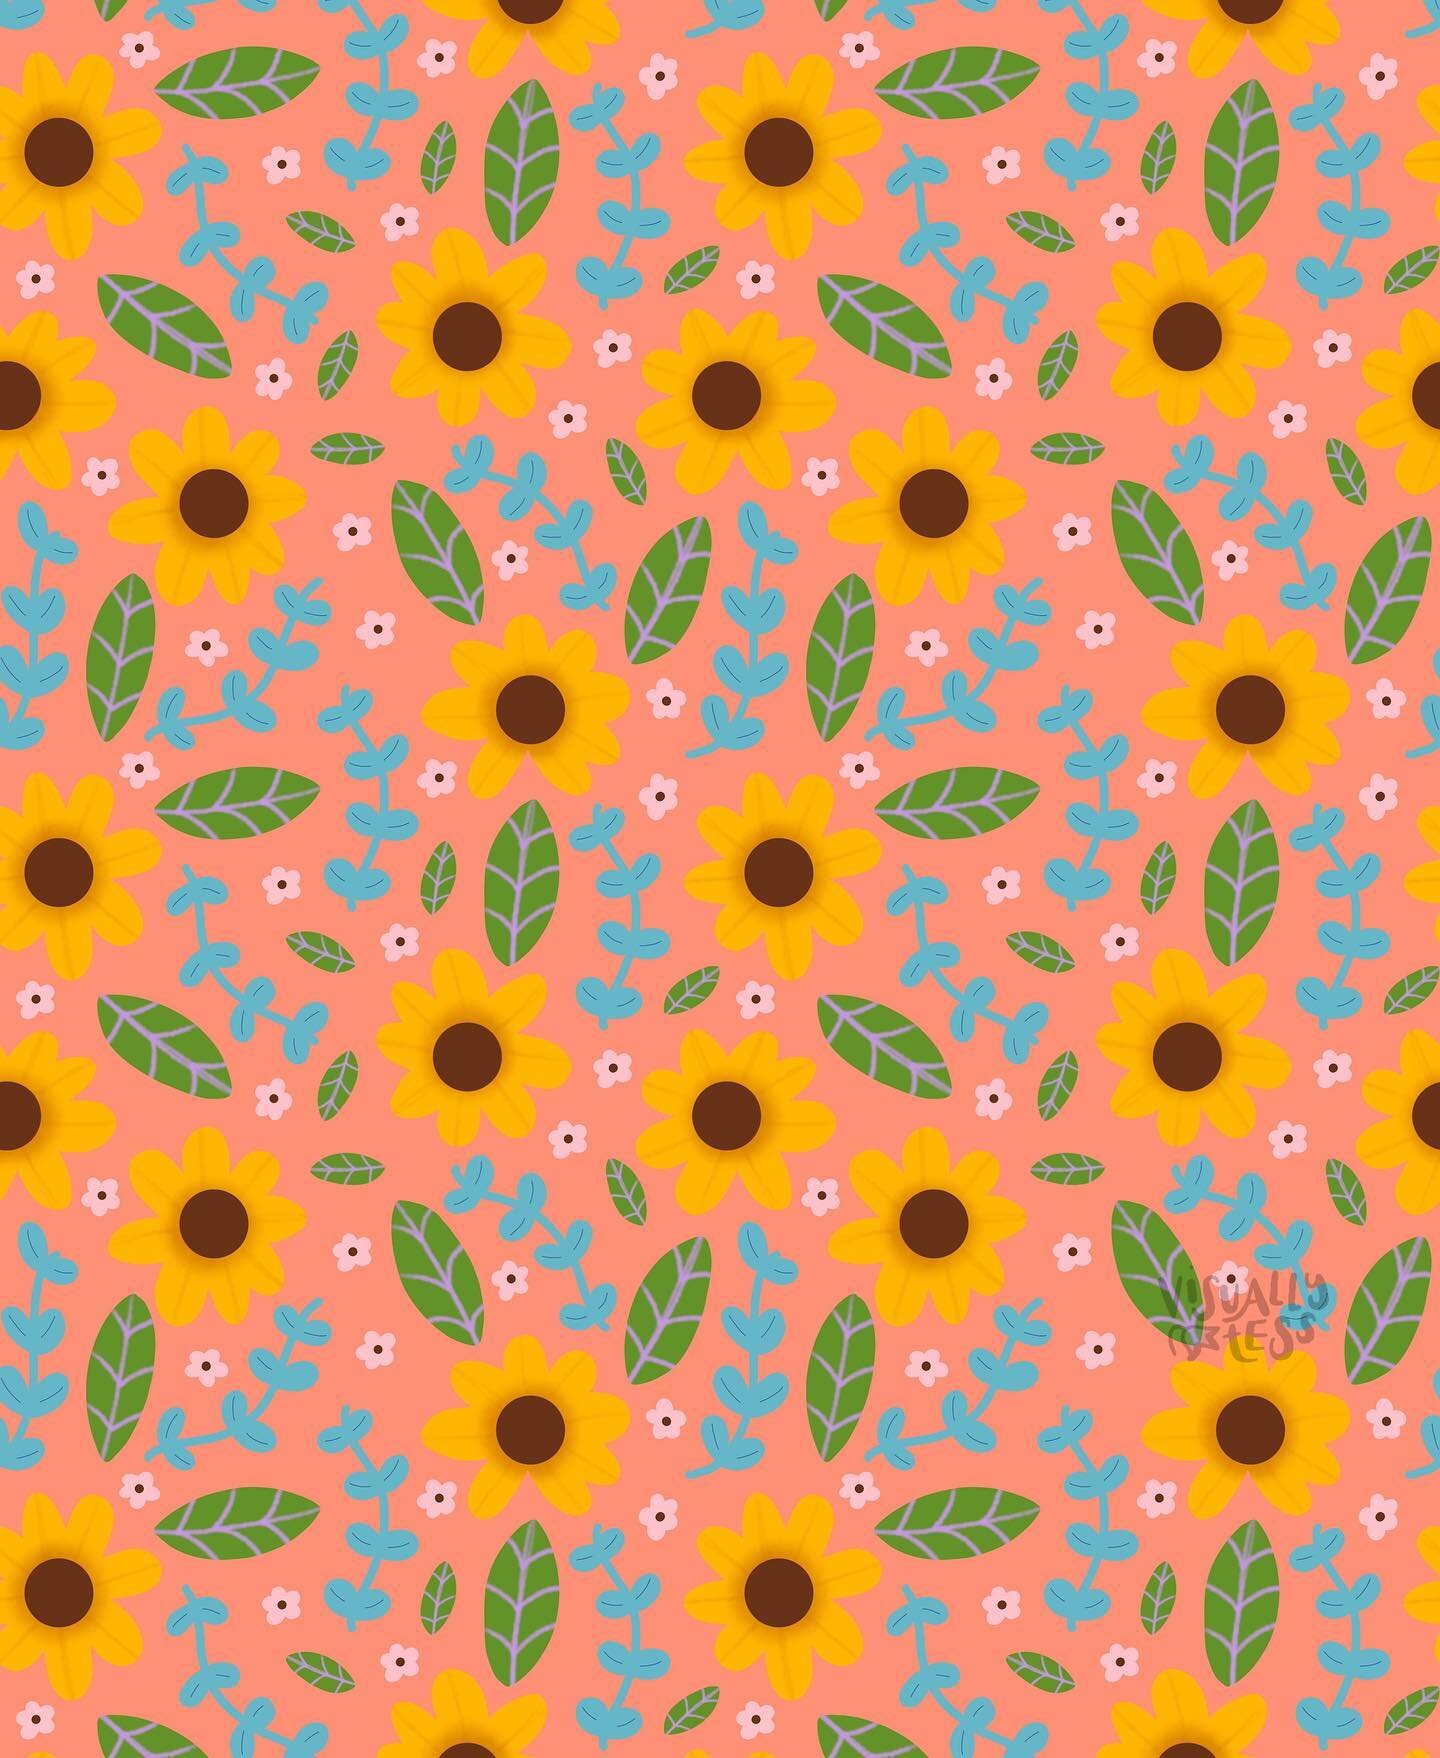 Spring floral pattern for this Easter weekend! 🐣🌸🌼
.
Which colour is your favourite?! ✨
.
#floral #easter #happyeaster #goodfriday #spring #eastersunday #surfacepatterndesign #patterndesign #textile #patternbank #spoonflower #sunflower #leaf #foli